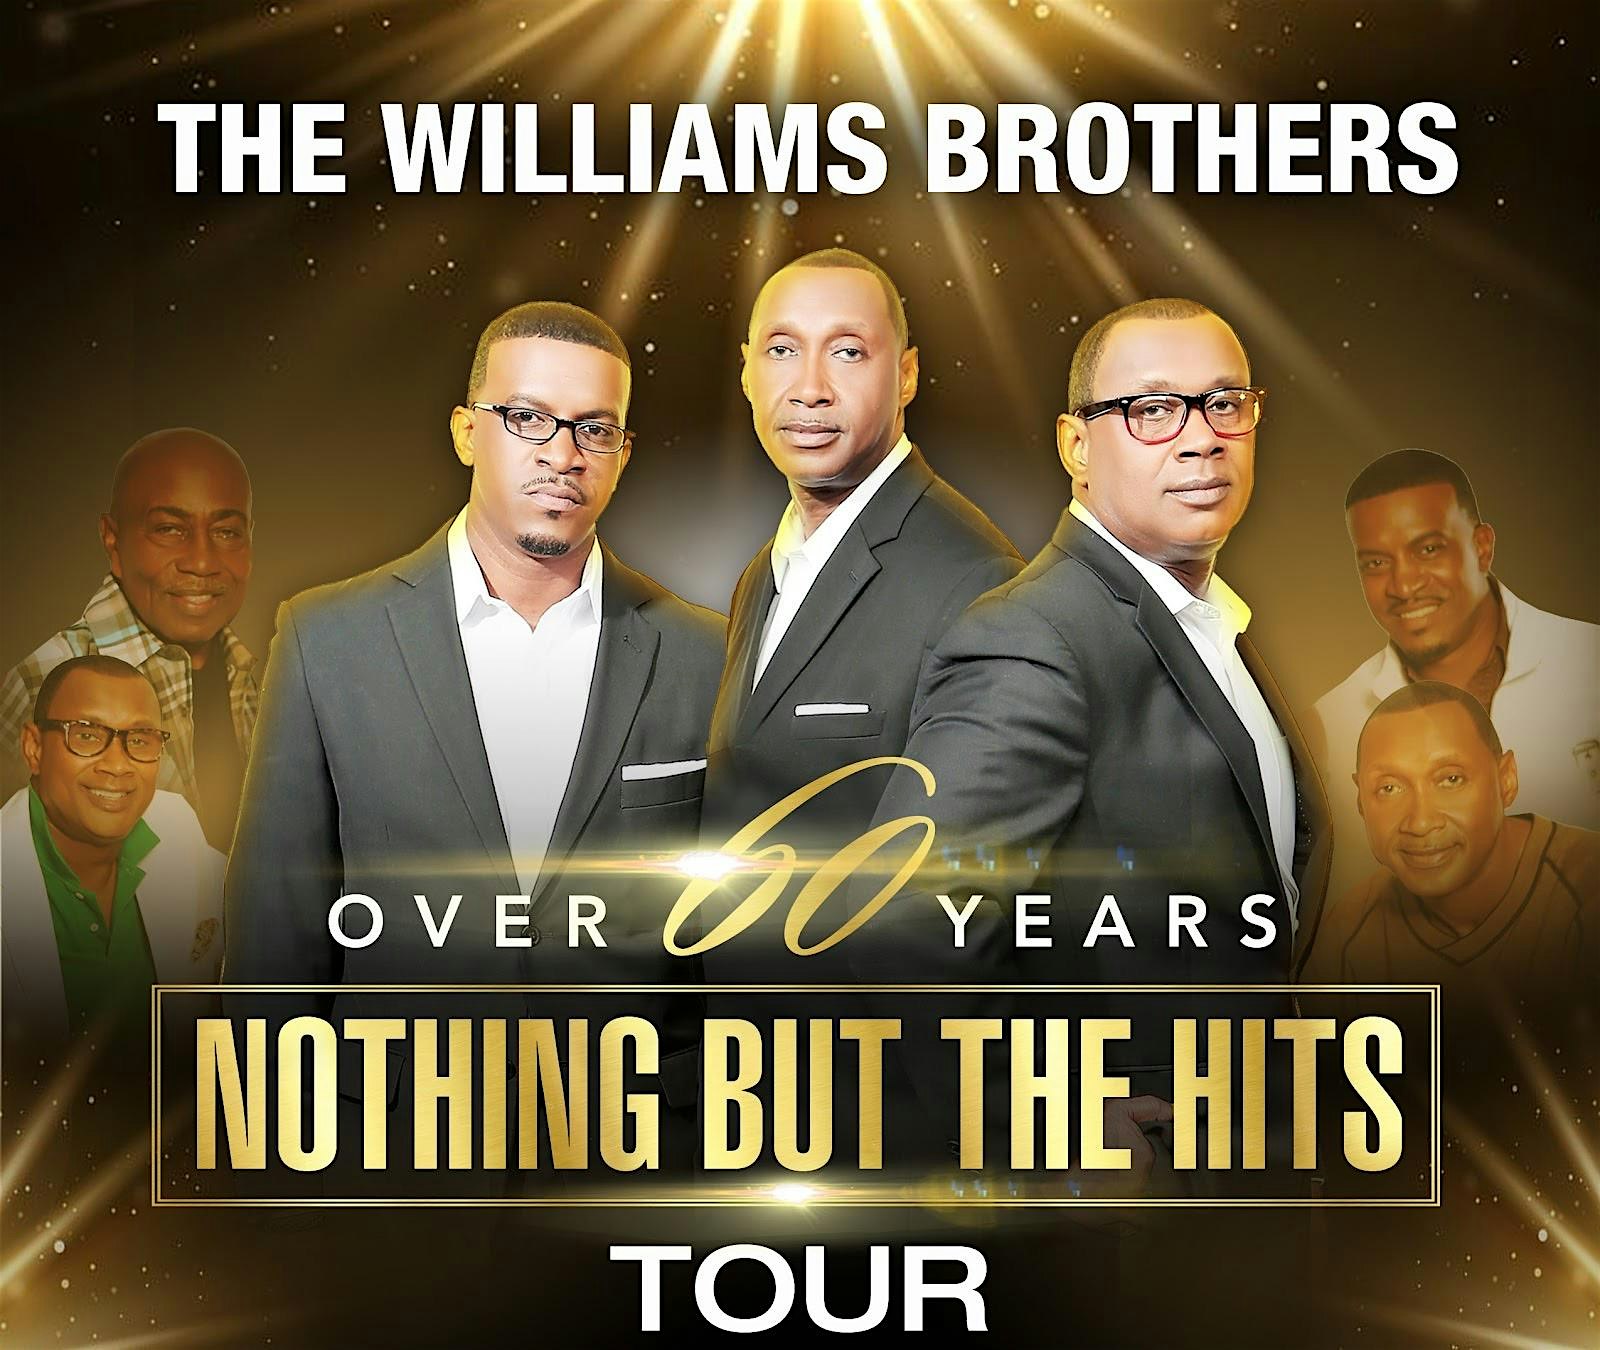 The Williams Brothers  Nothing but the Hits Farewell Tour 2022 -  Jax. Fla